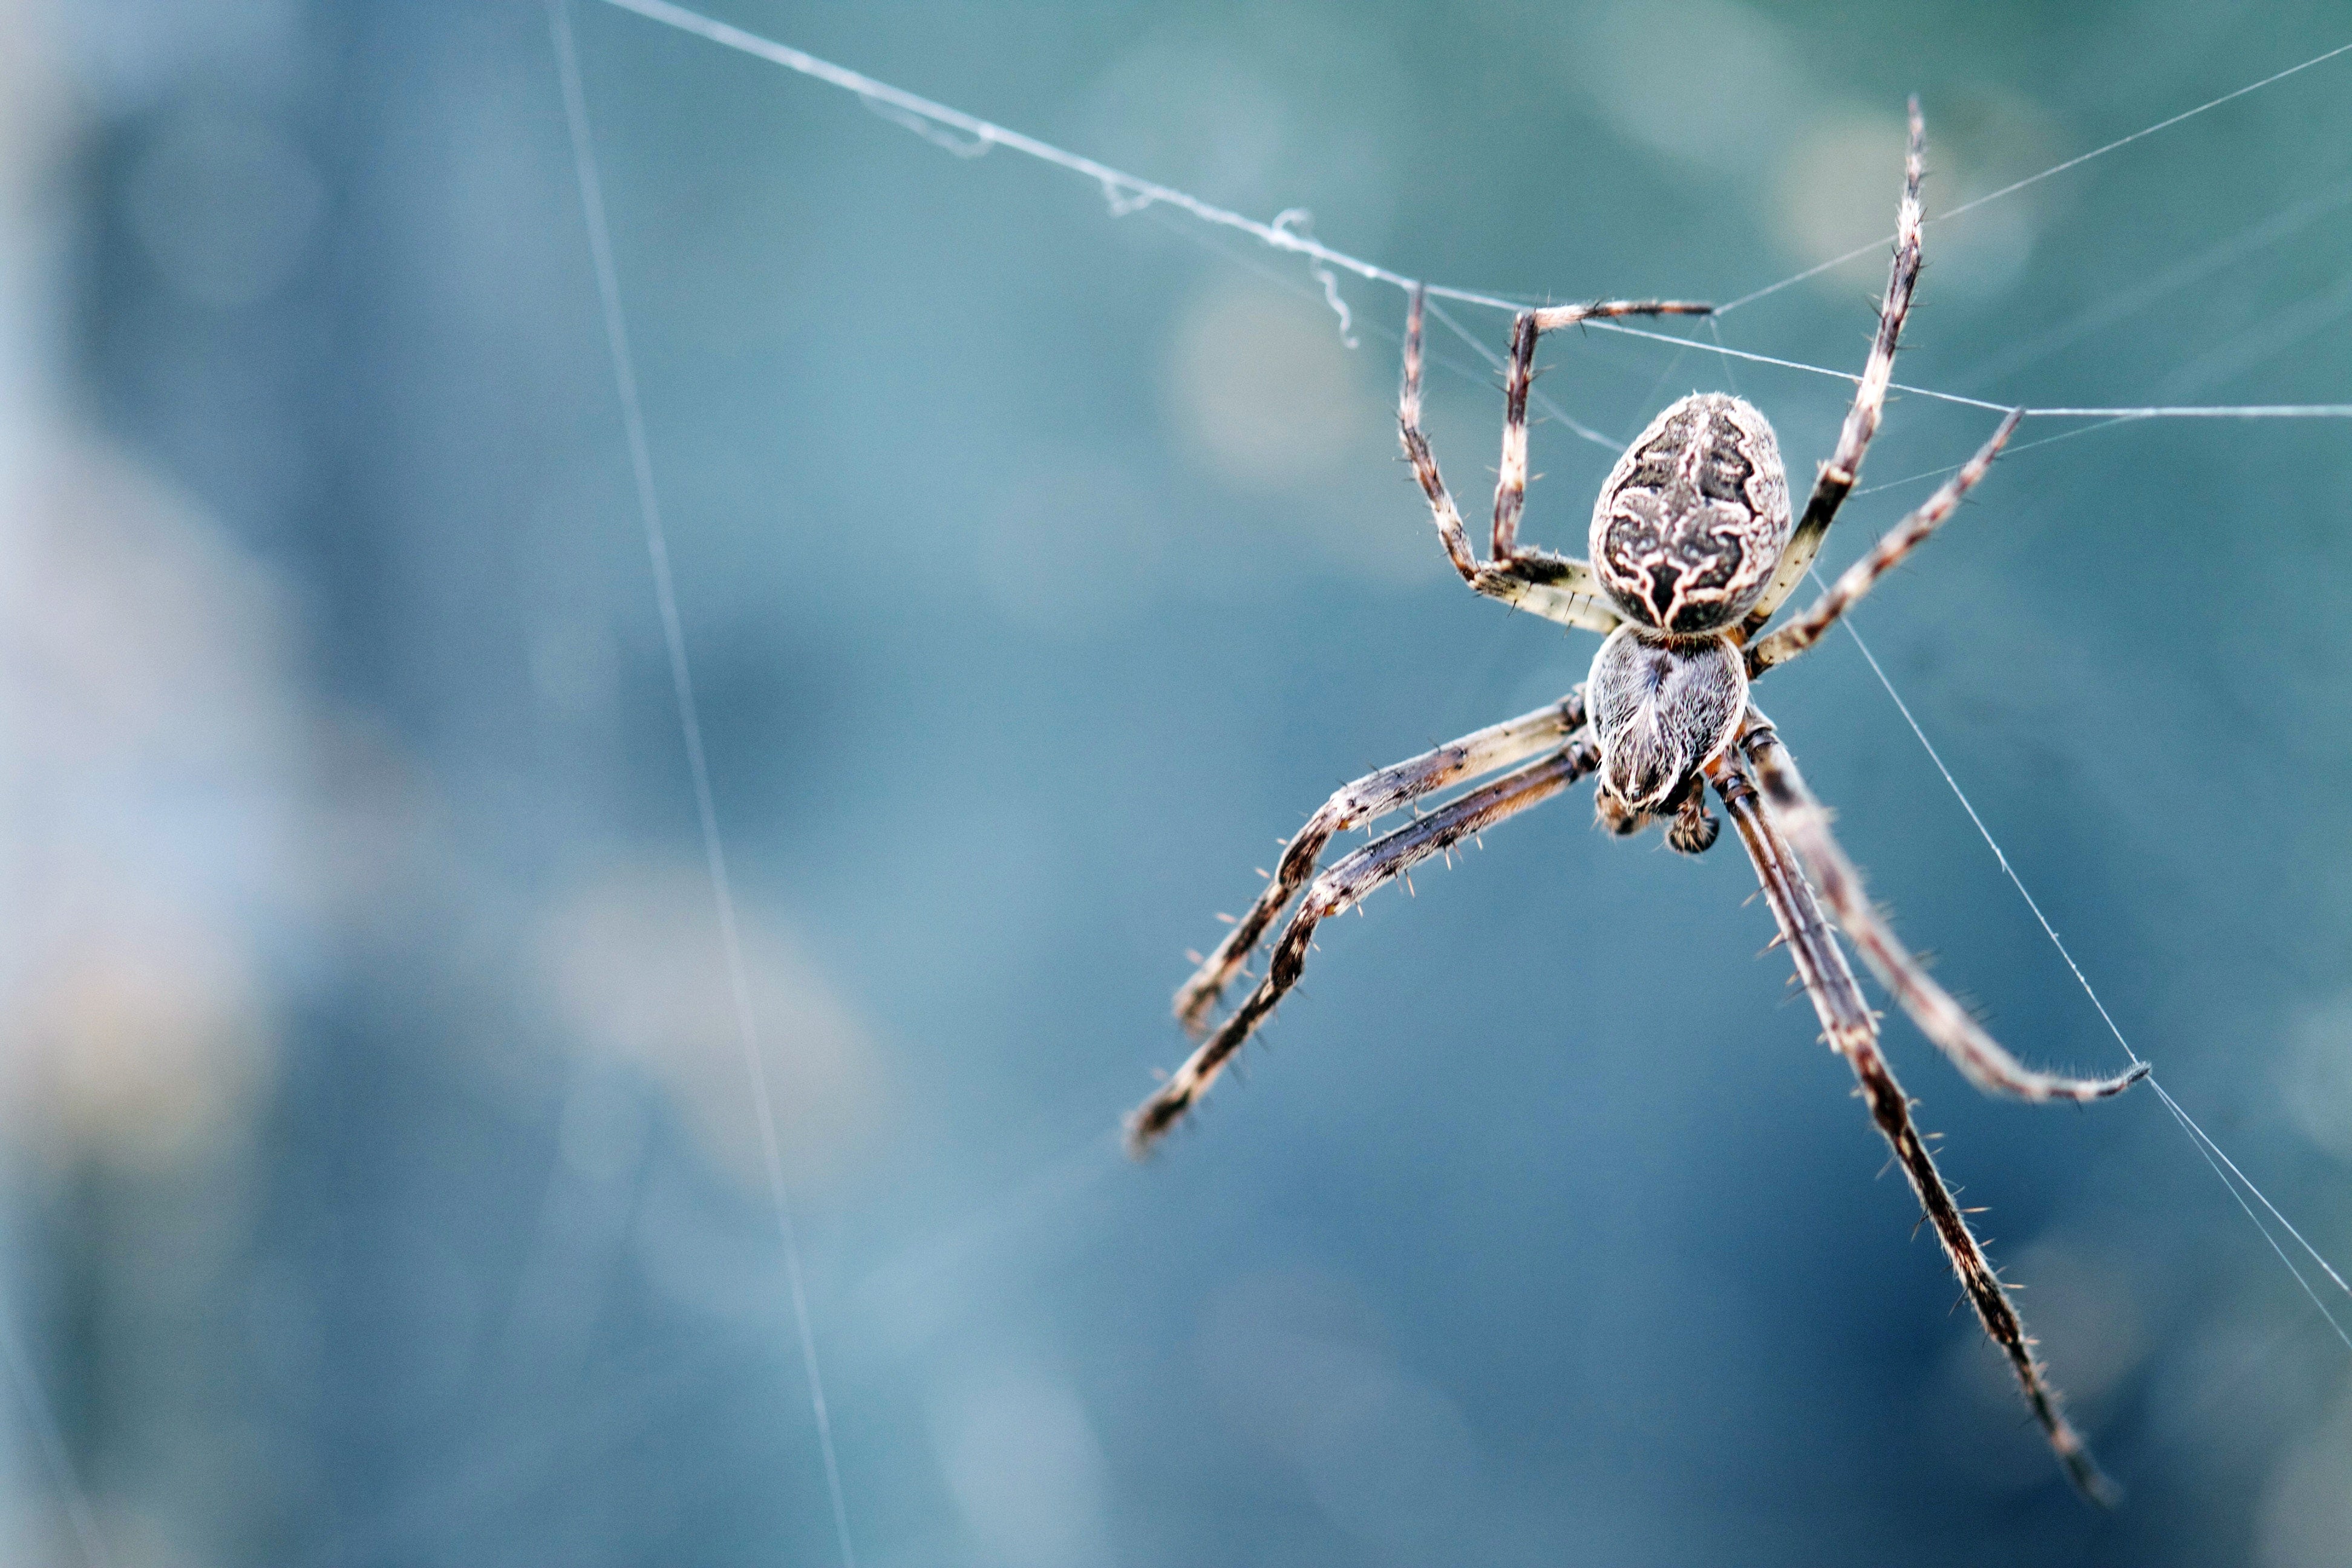 How many spiders Google use at a time?